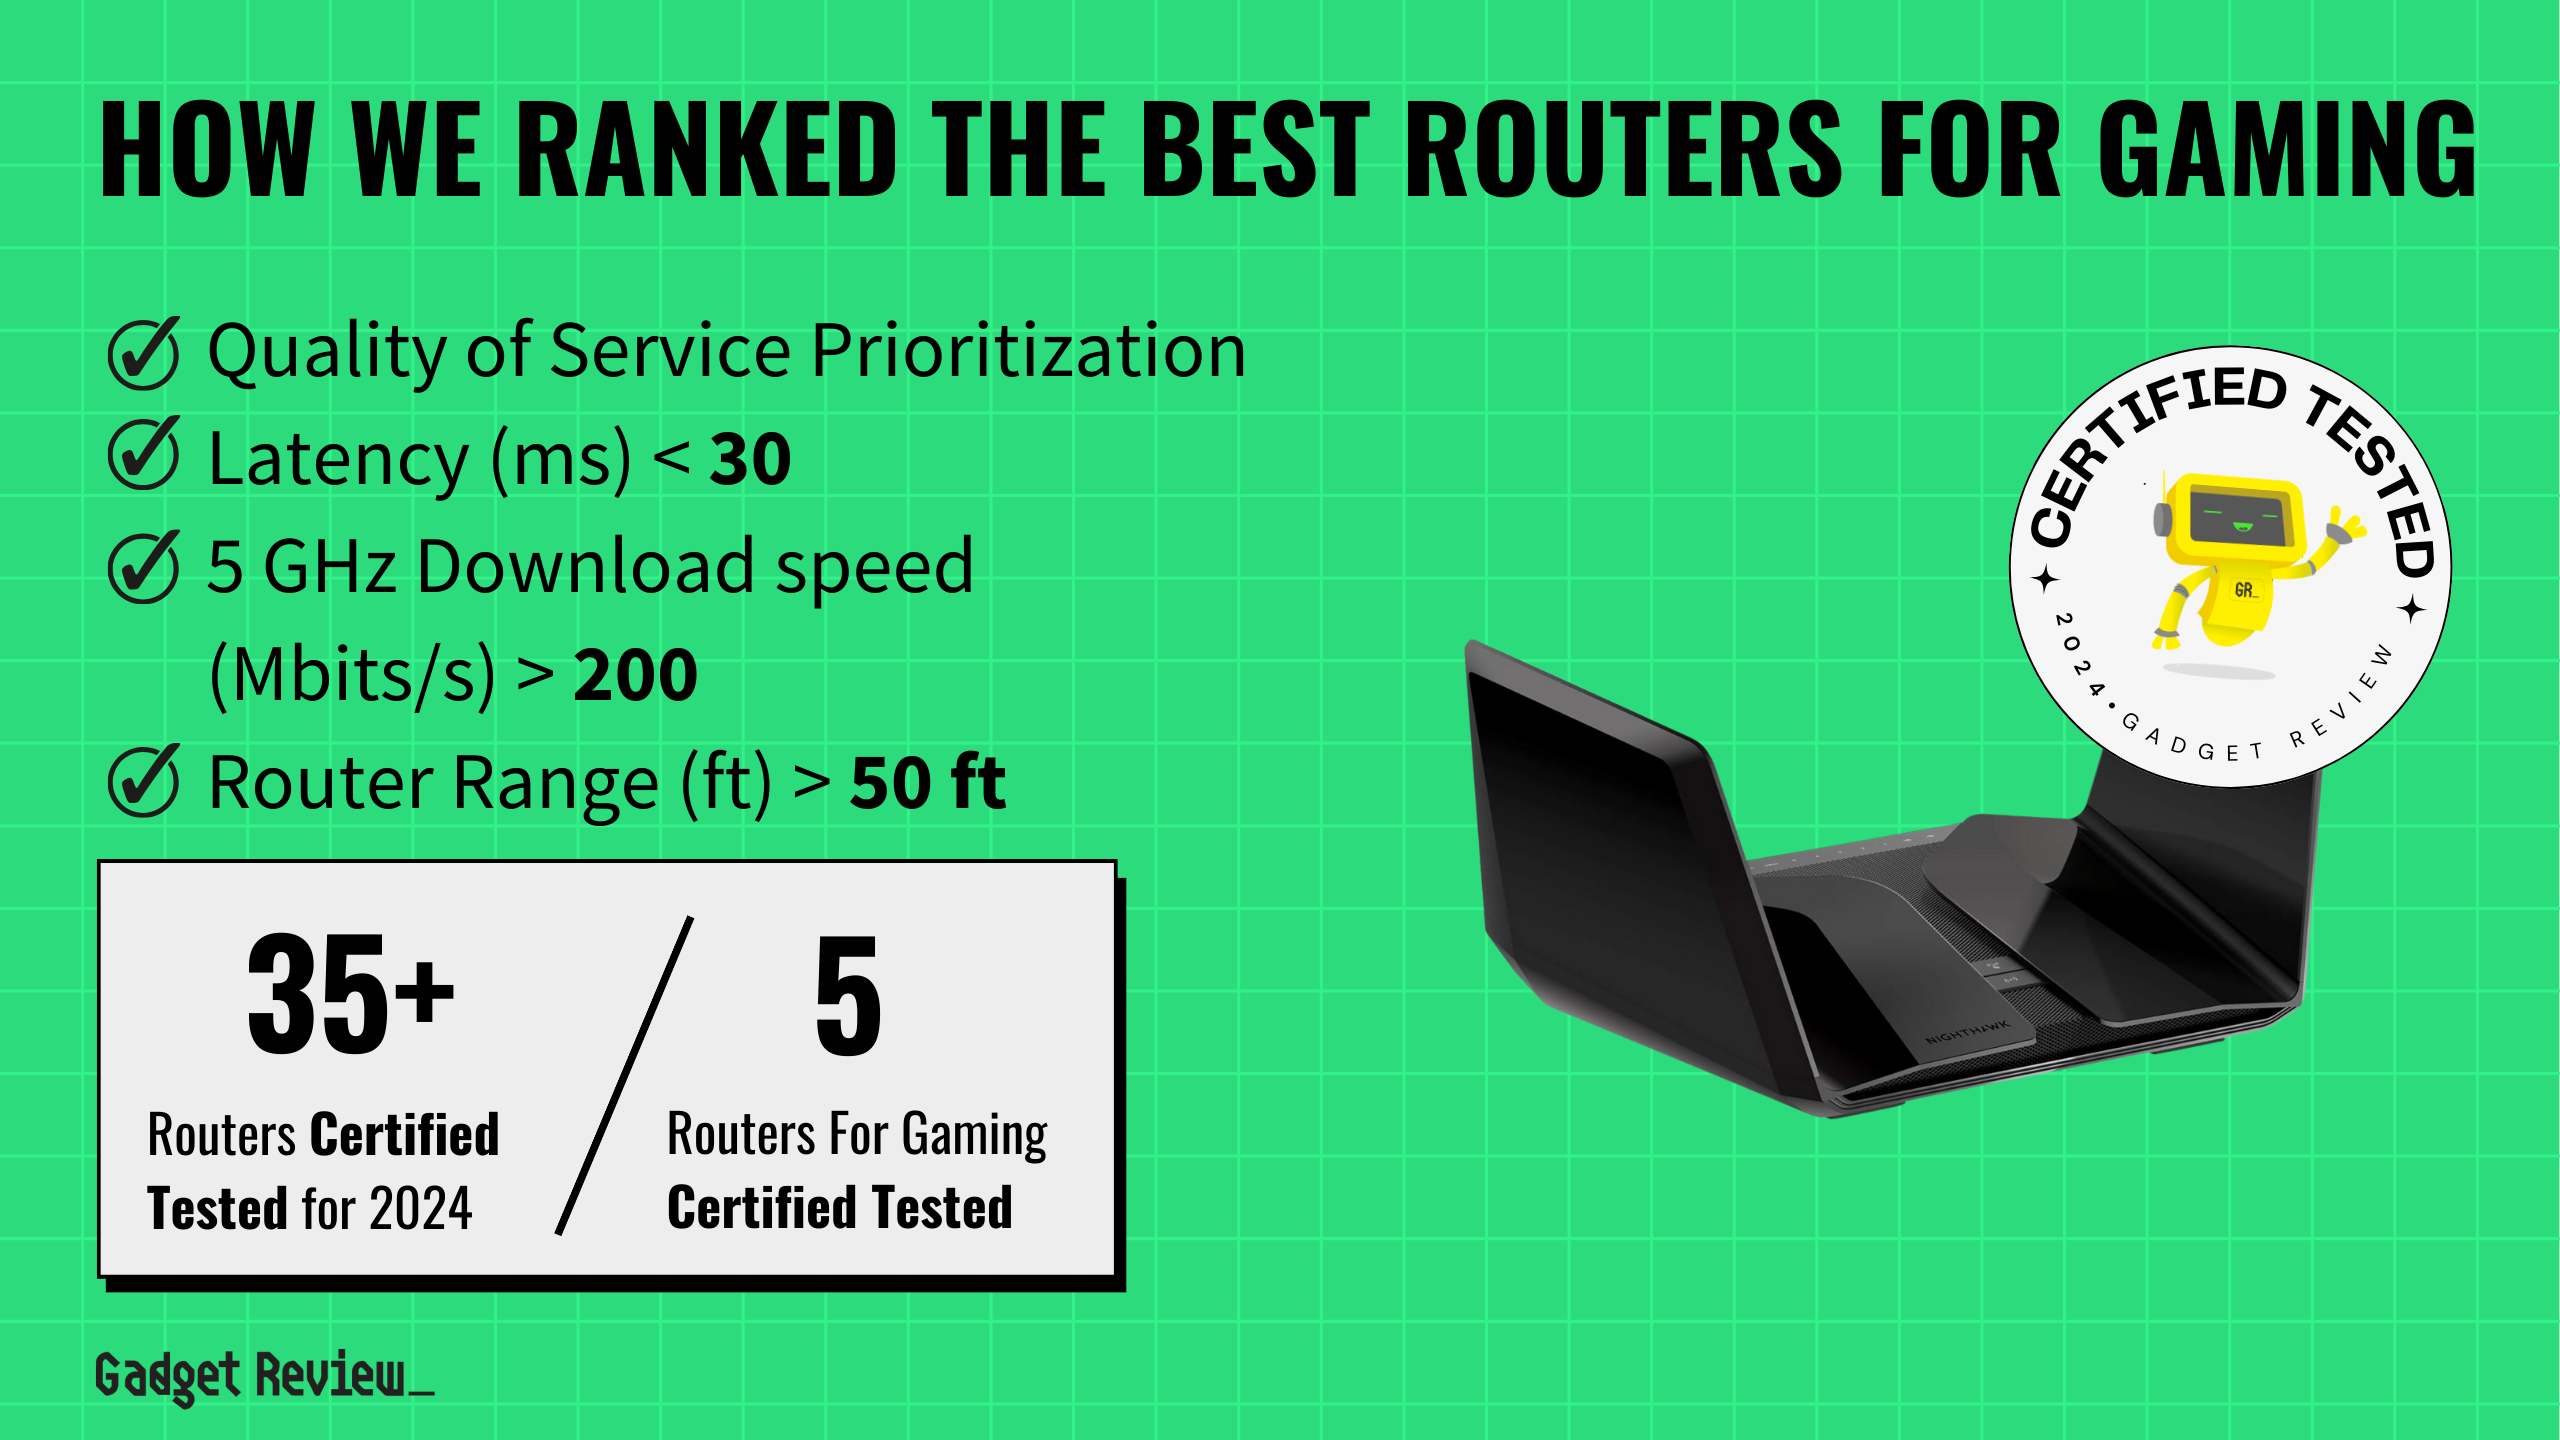 best router for gaming guide that shows the top best router model